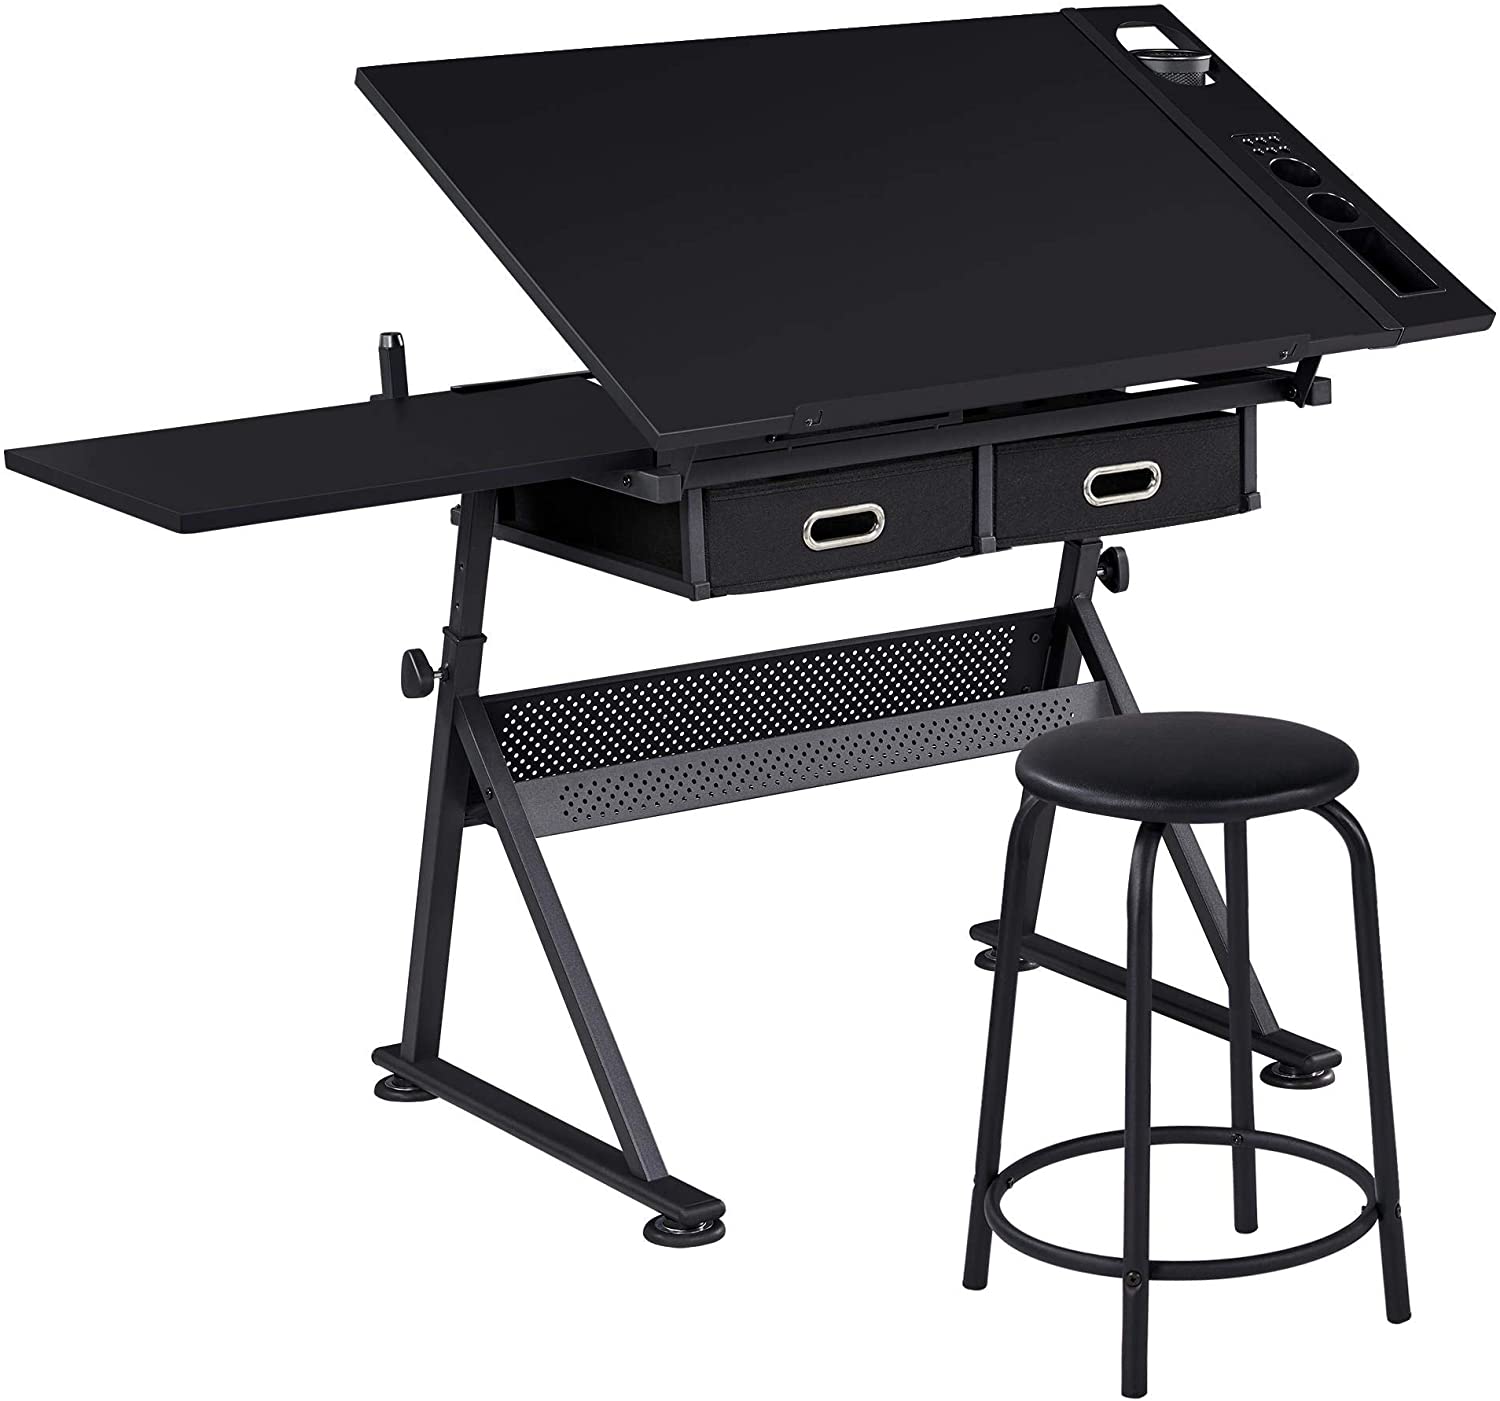 Drawing table for creative people